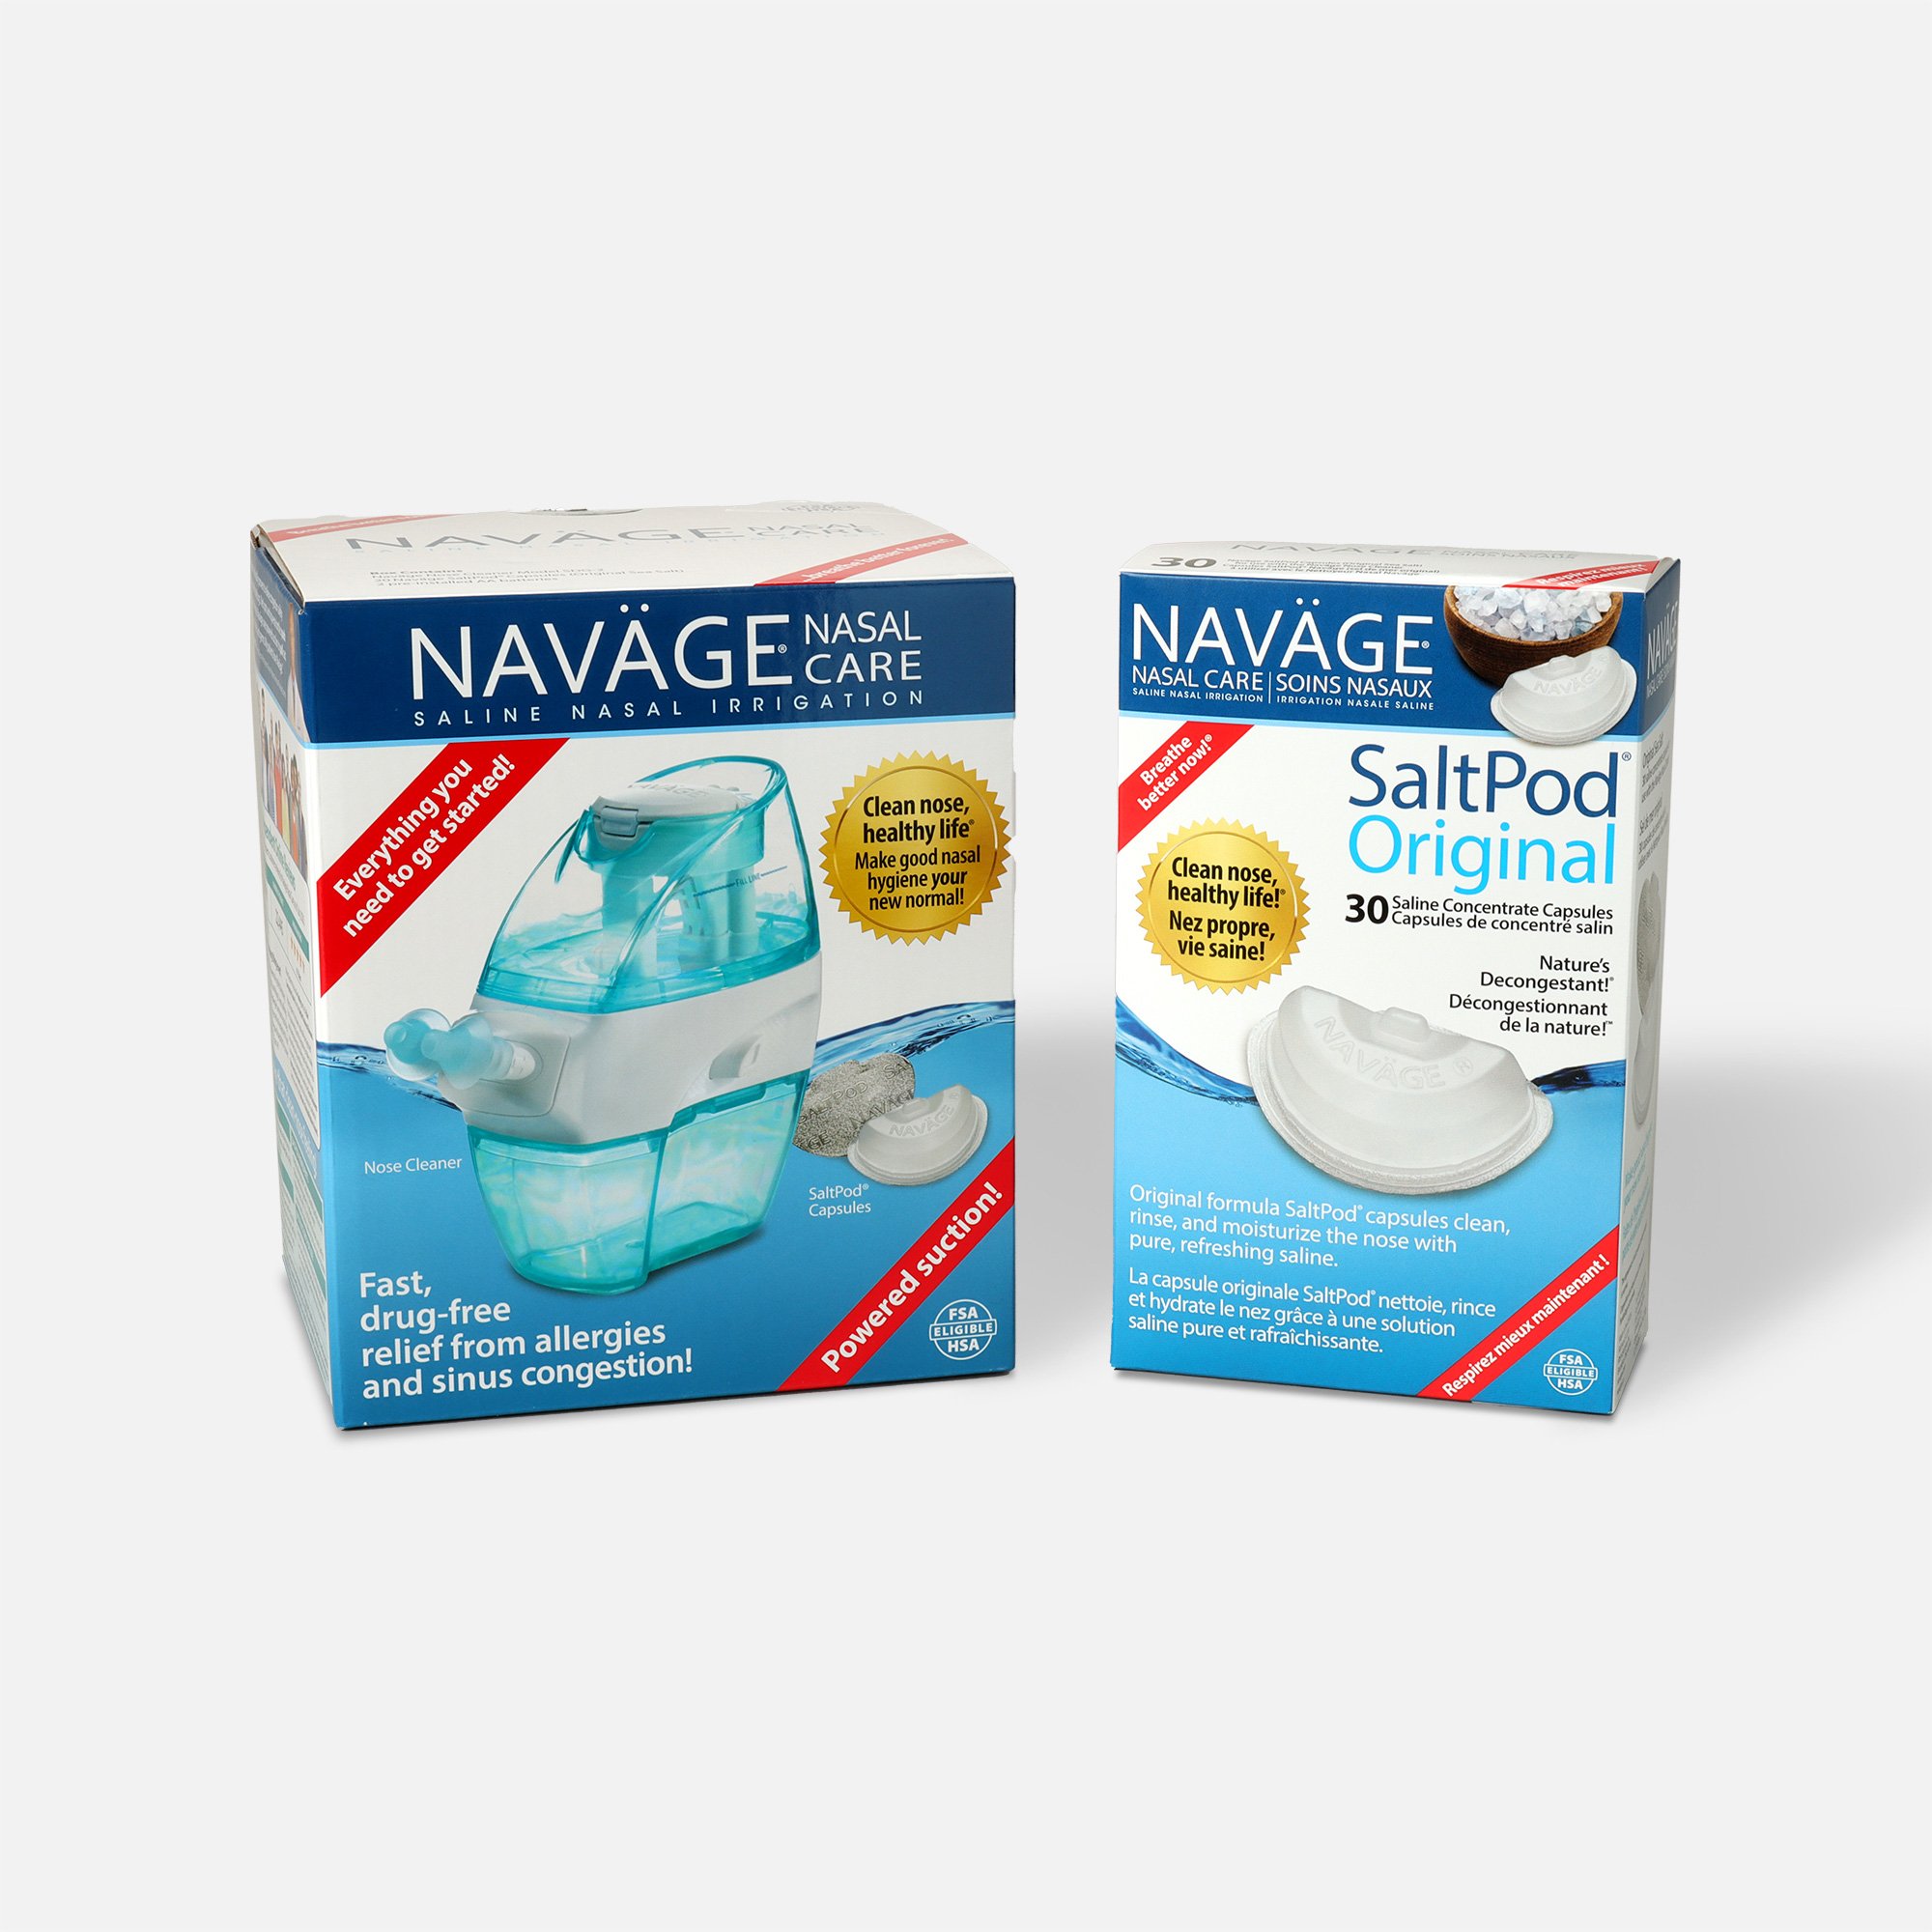 Navage Nasal Care added a new photo. - Navage Nasal Care